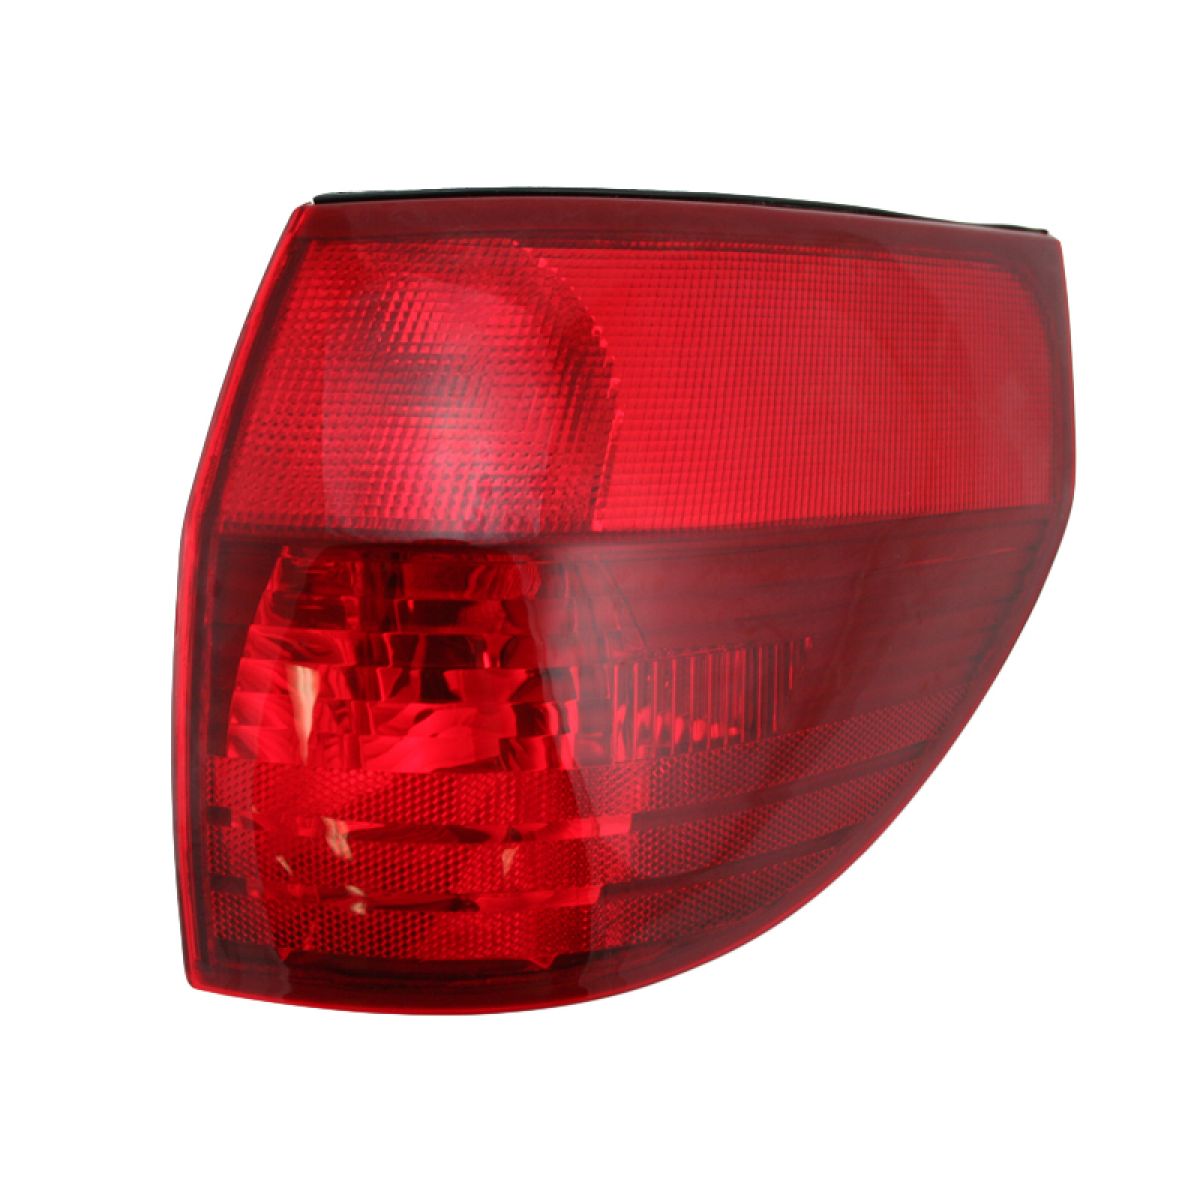 2004 Toyota sienna rear tail light bulb replacement